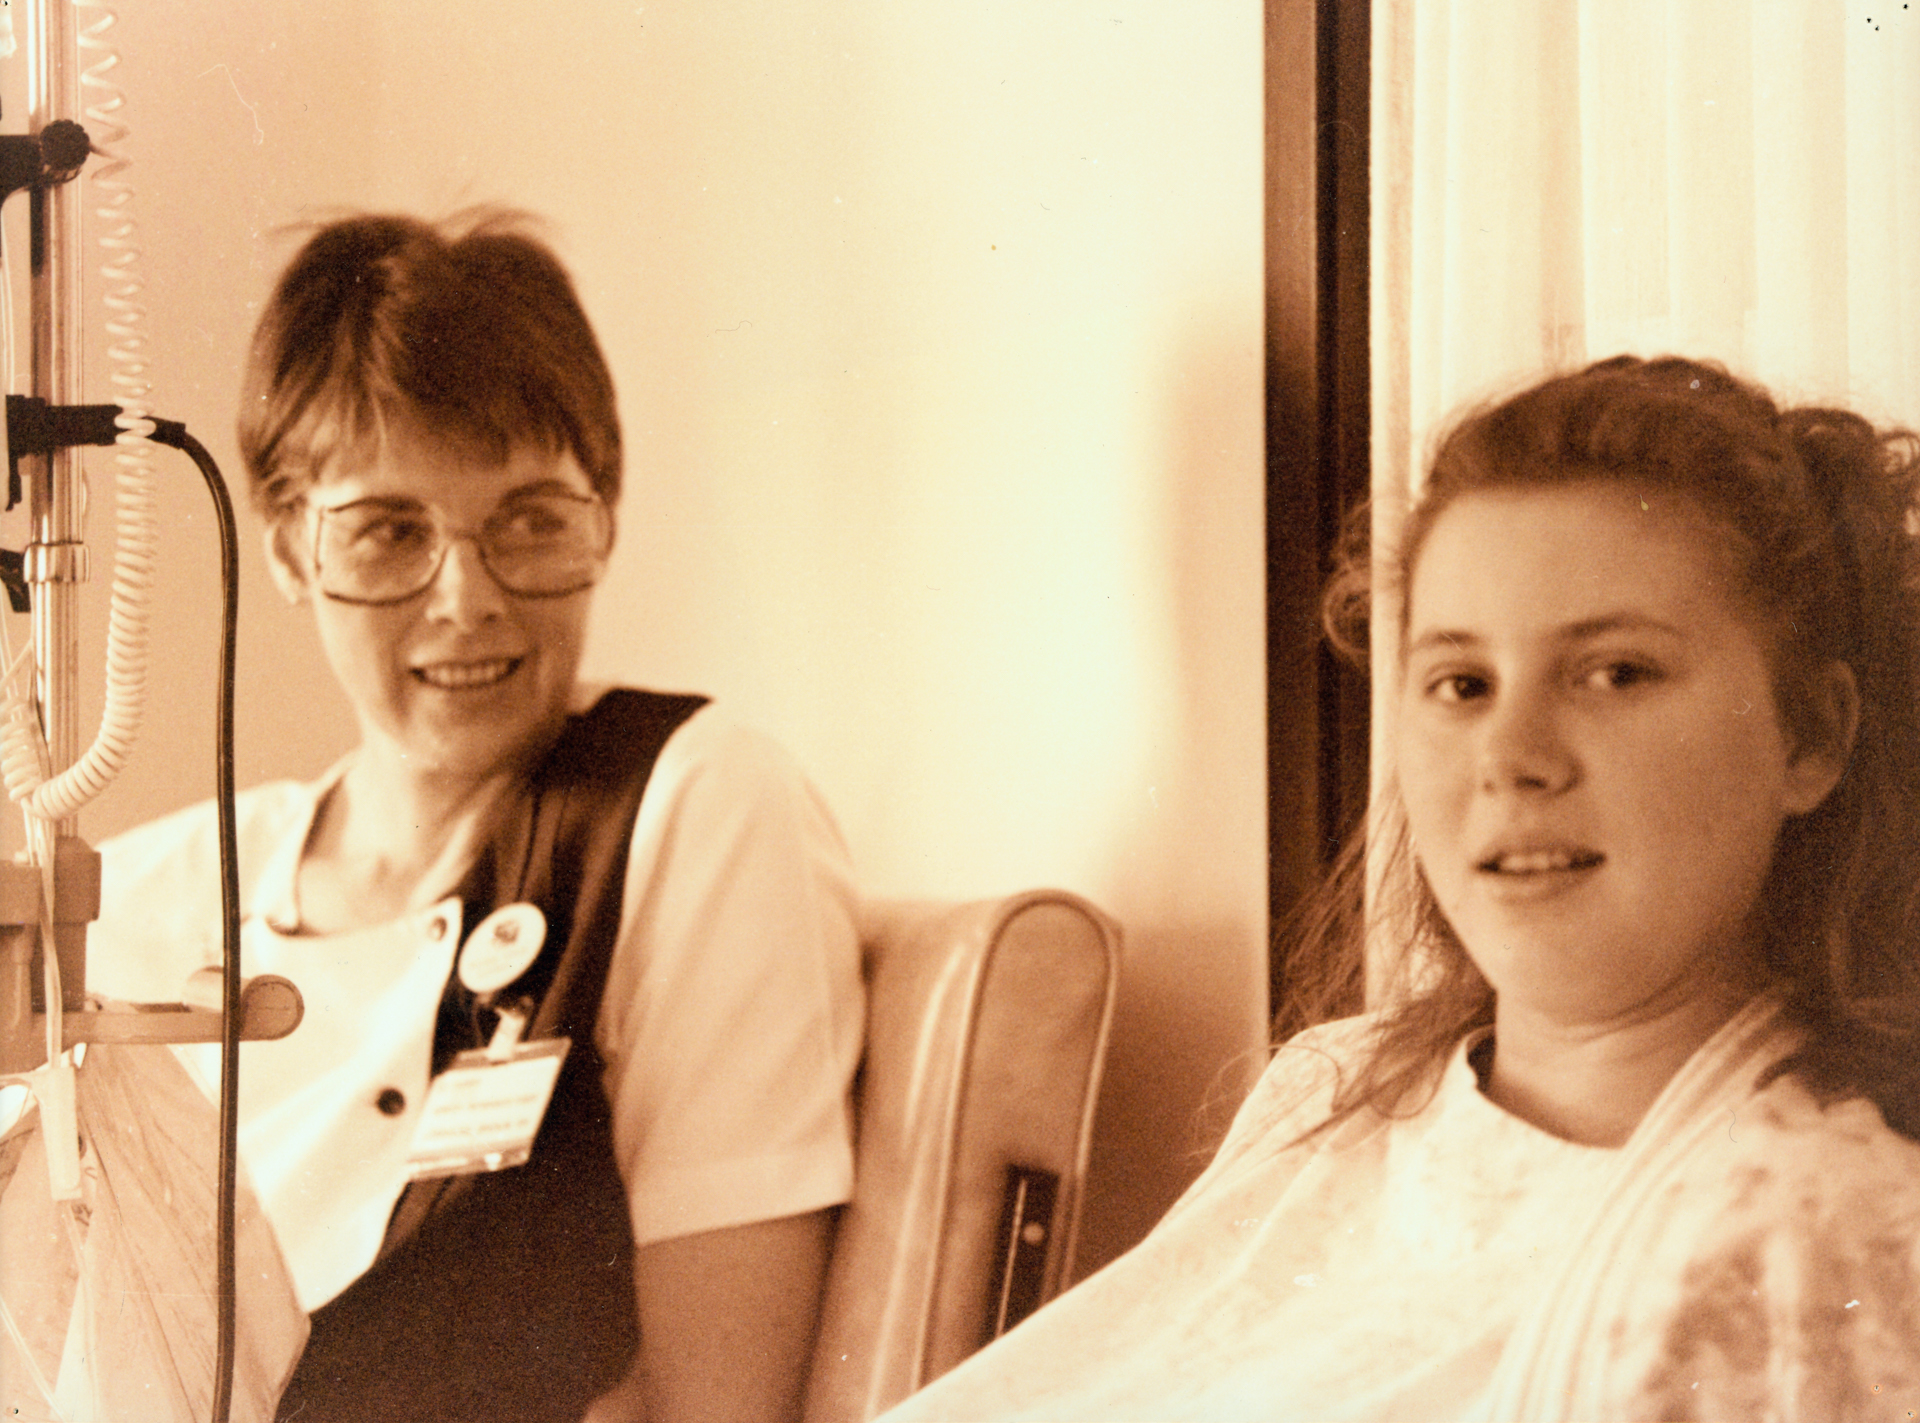 Sepia brown tone image. A woman with short hair and large glasses and badge is looking at a young woman, who is looking at the camera.